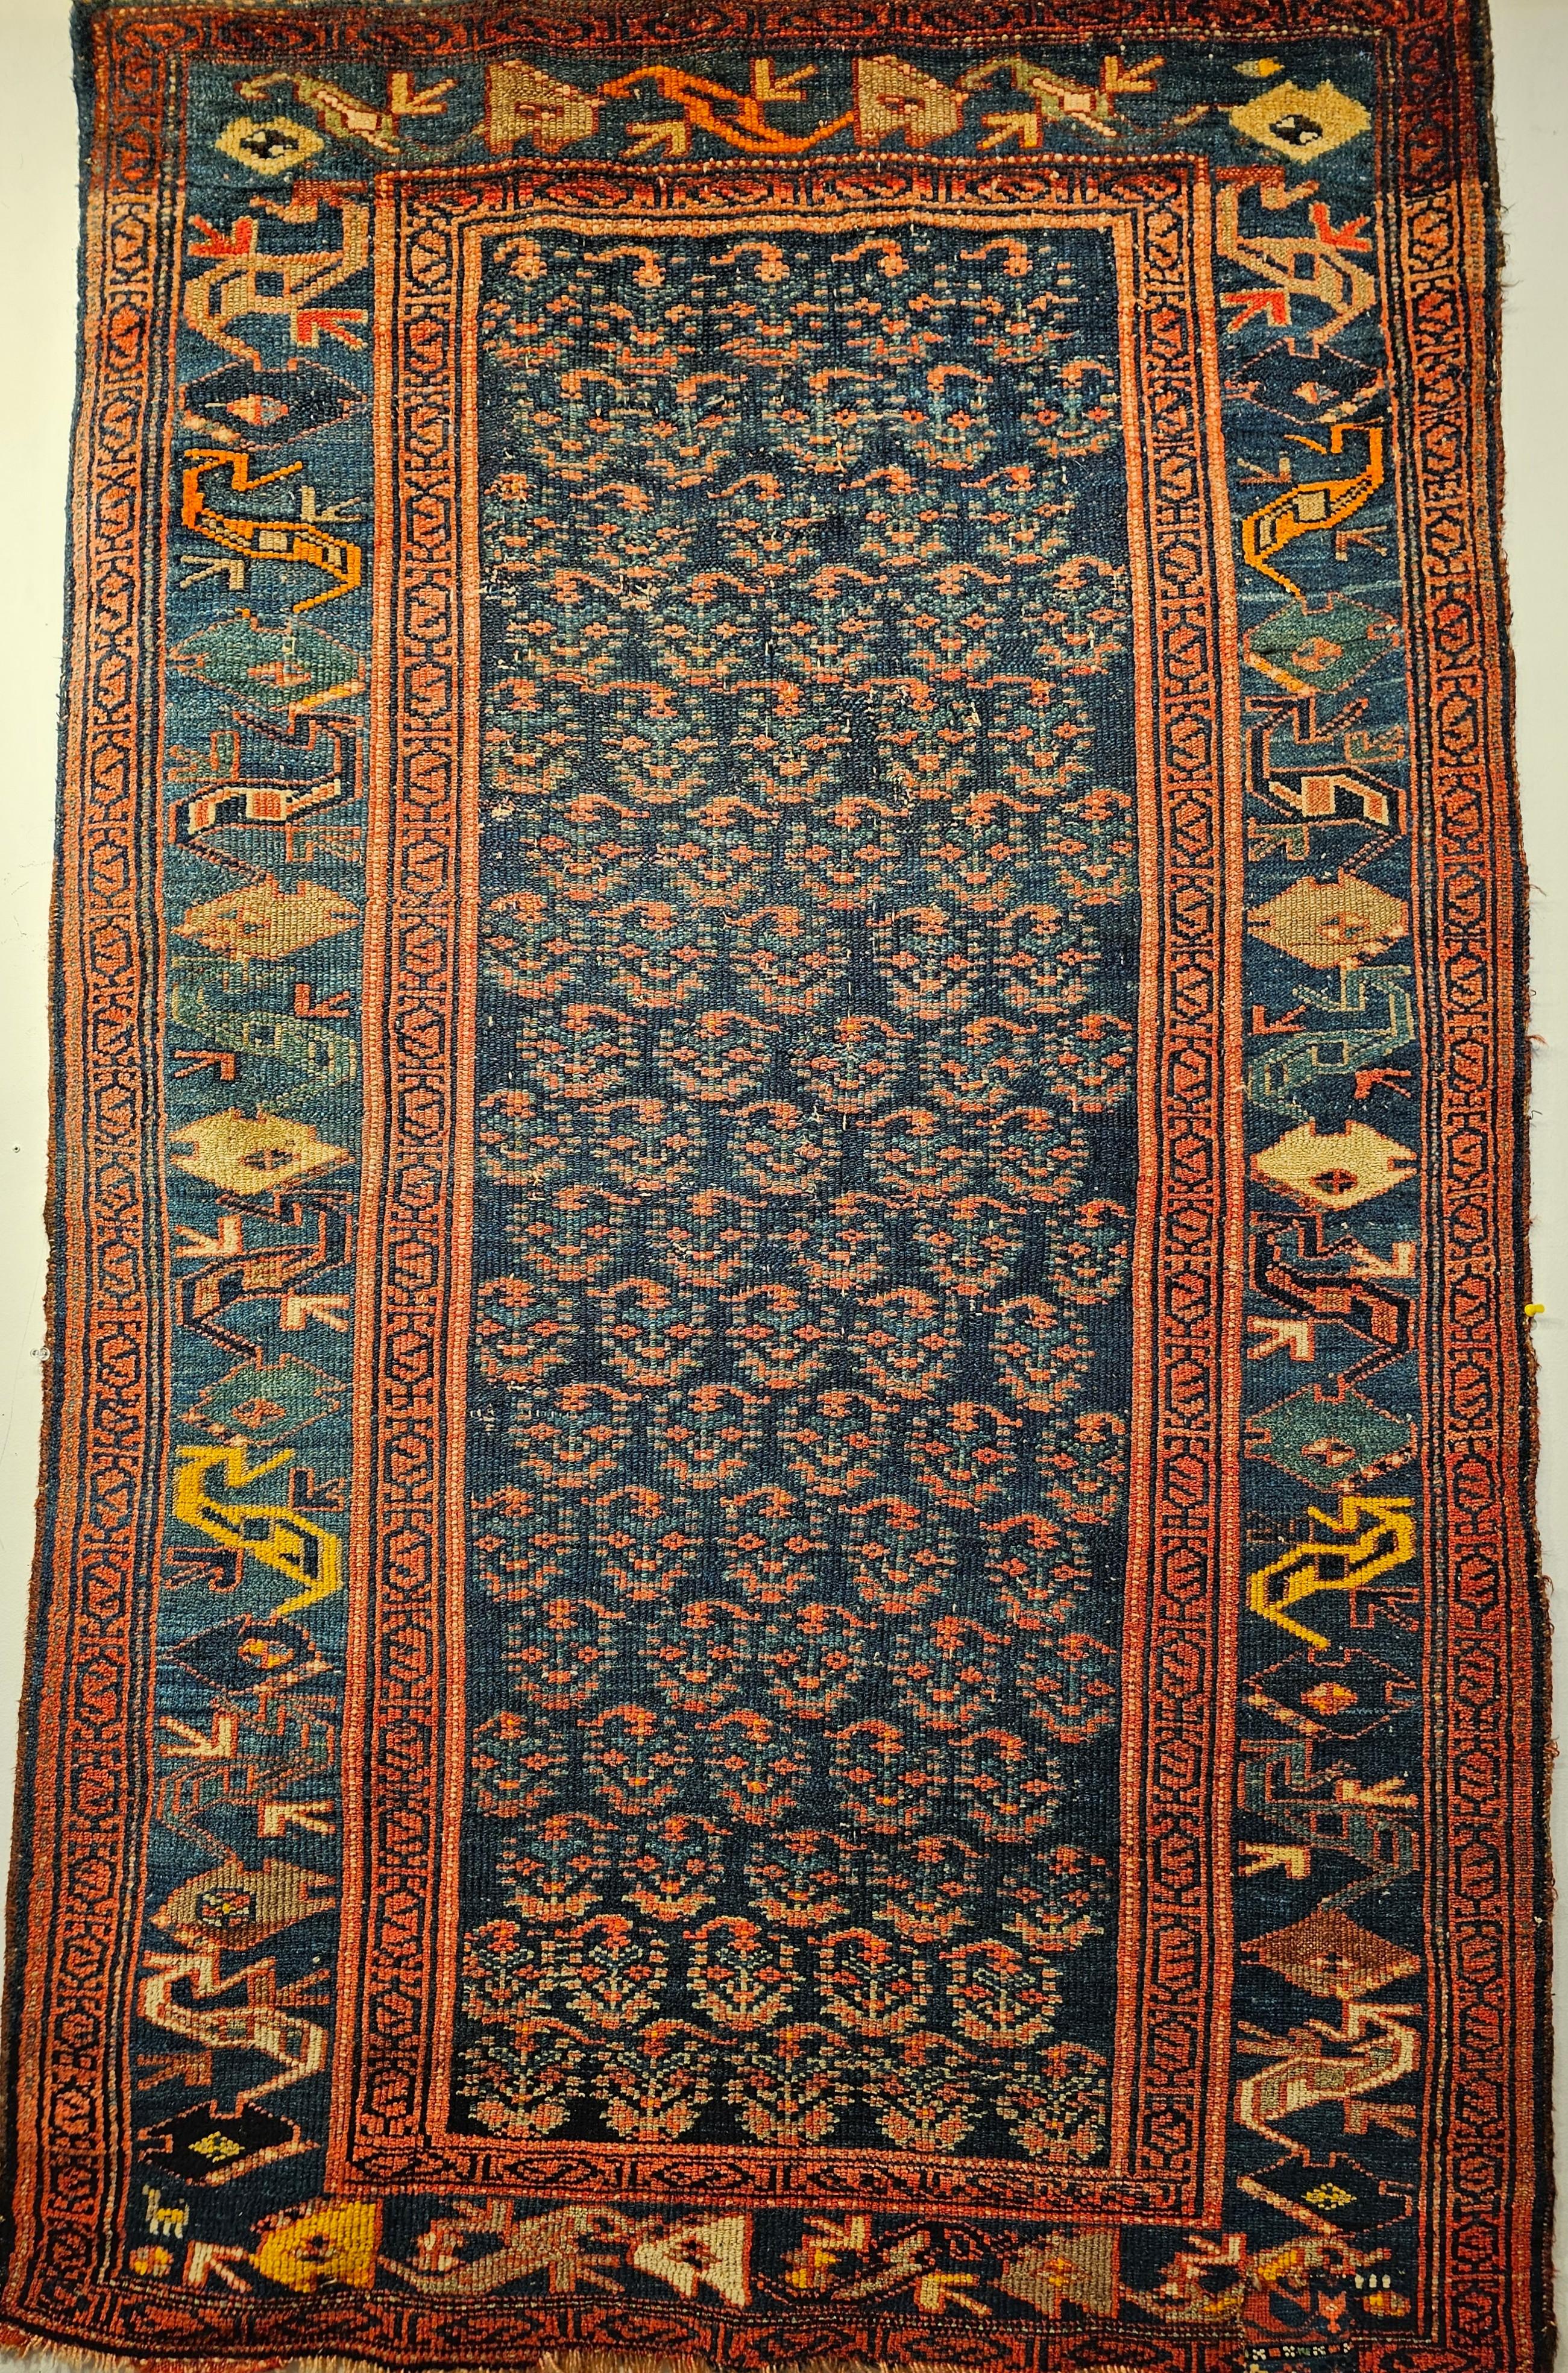 Vintage Persian Bidjar area rug in an allover paisley pattern in abrash navy blue, green, and saffron yellow colors circa the 4th quarter of the 1800s.  This beautiful rug was woven by the Kurds in the Western Persian Bidjar area.  It has an abrash